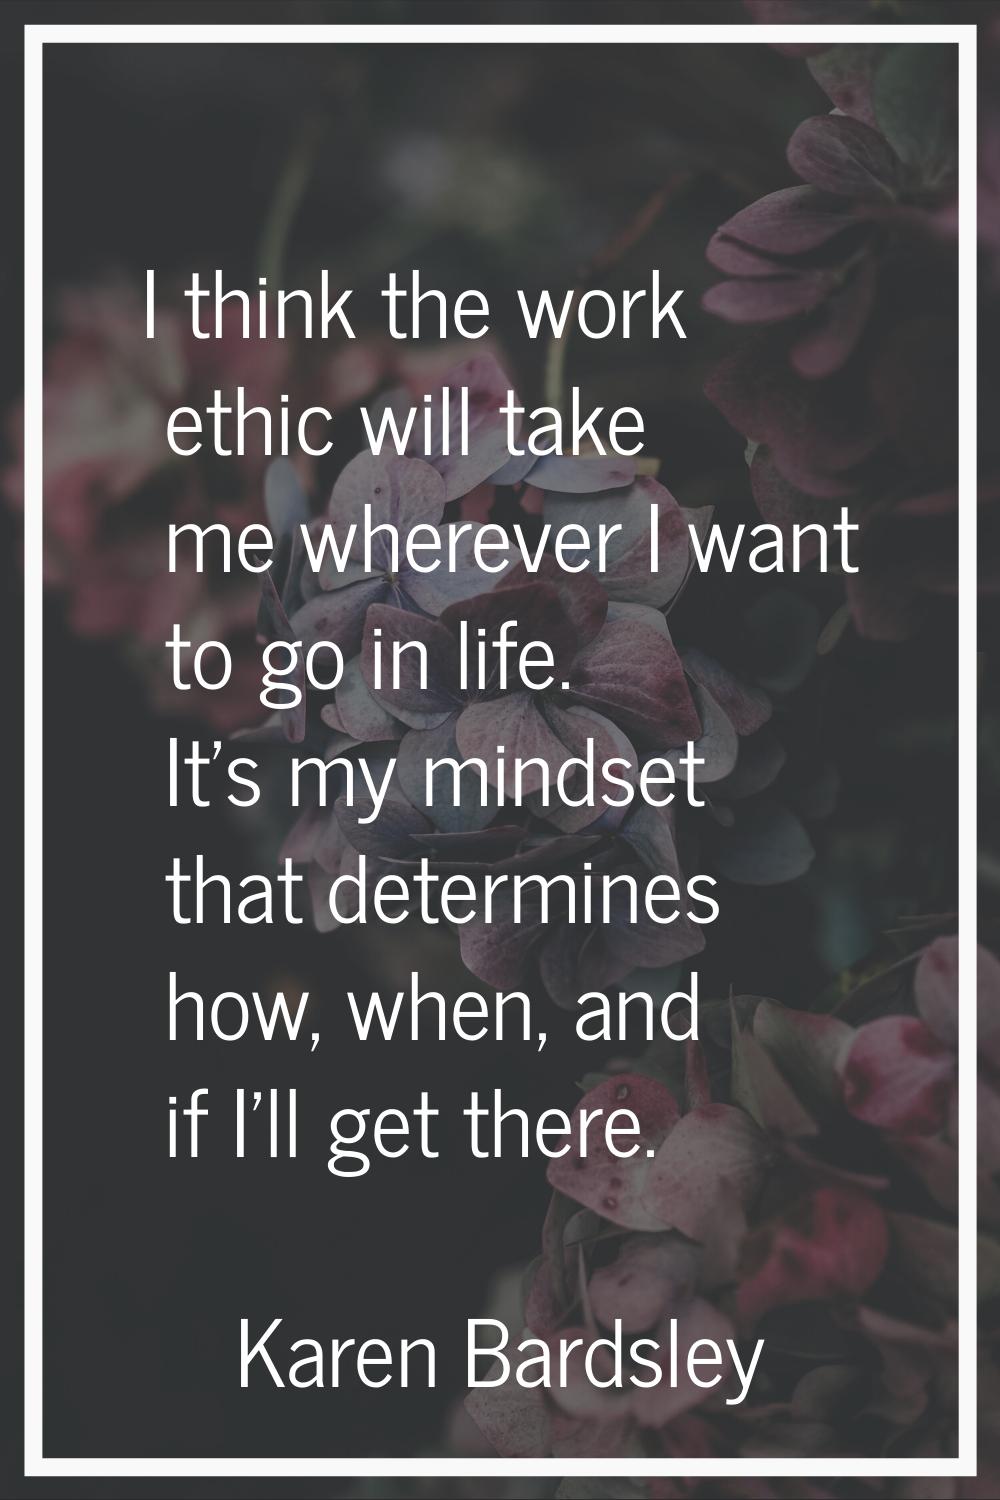 I think the work ethic will take me wherever I want to go in life. It's my mindset that determines 